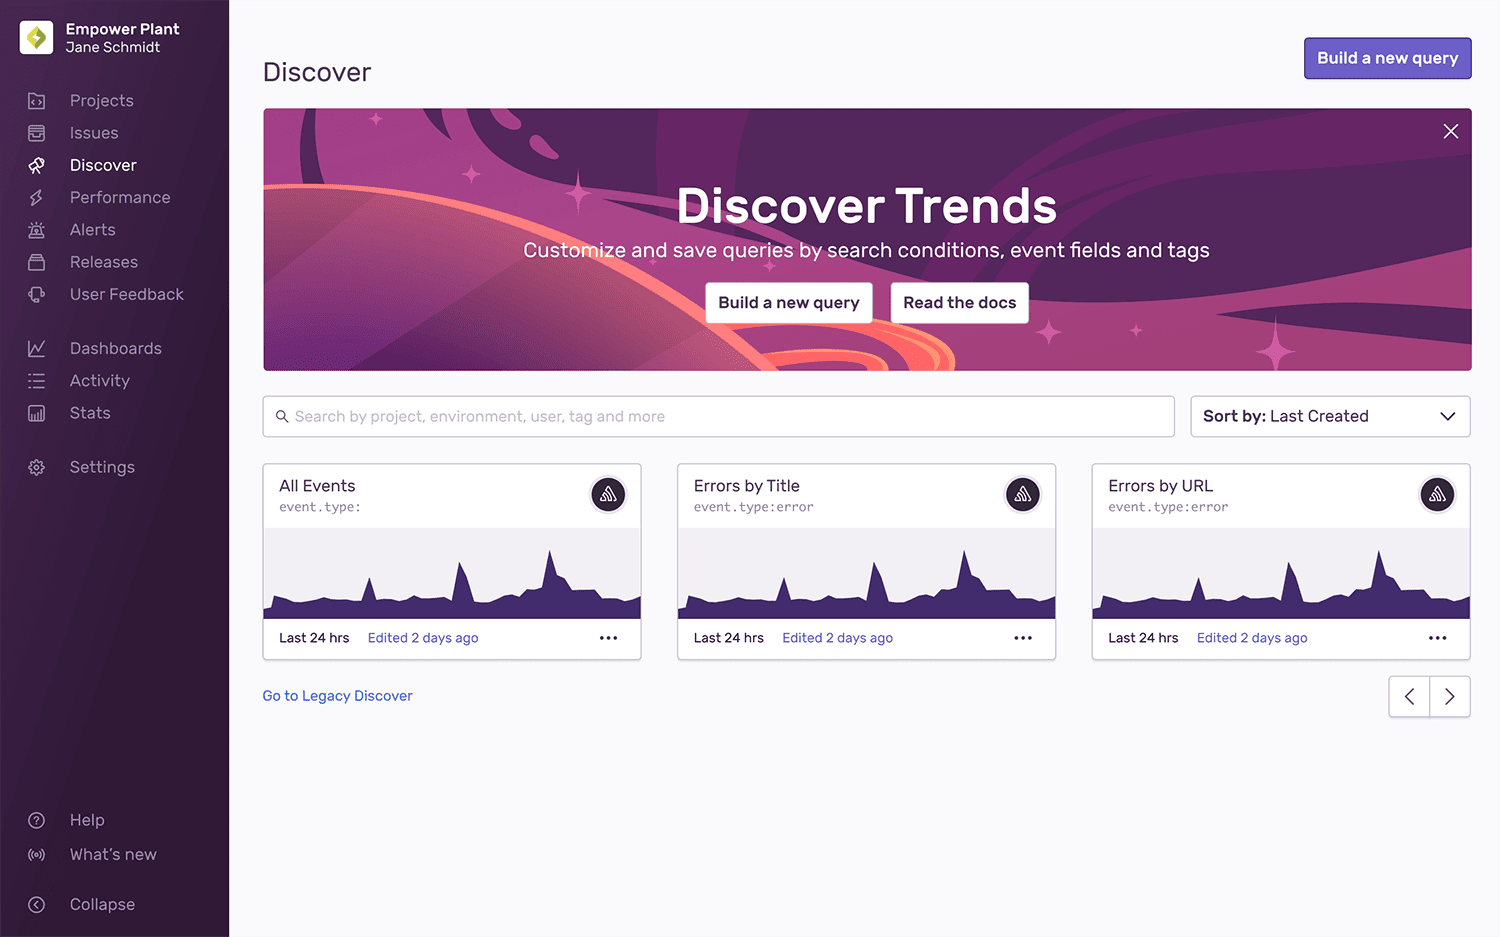 Full view of the Discover Homepage with query cards and button to build new queries.